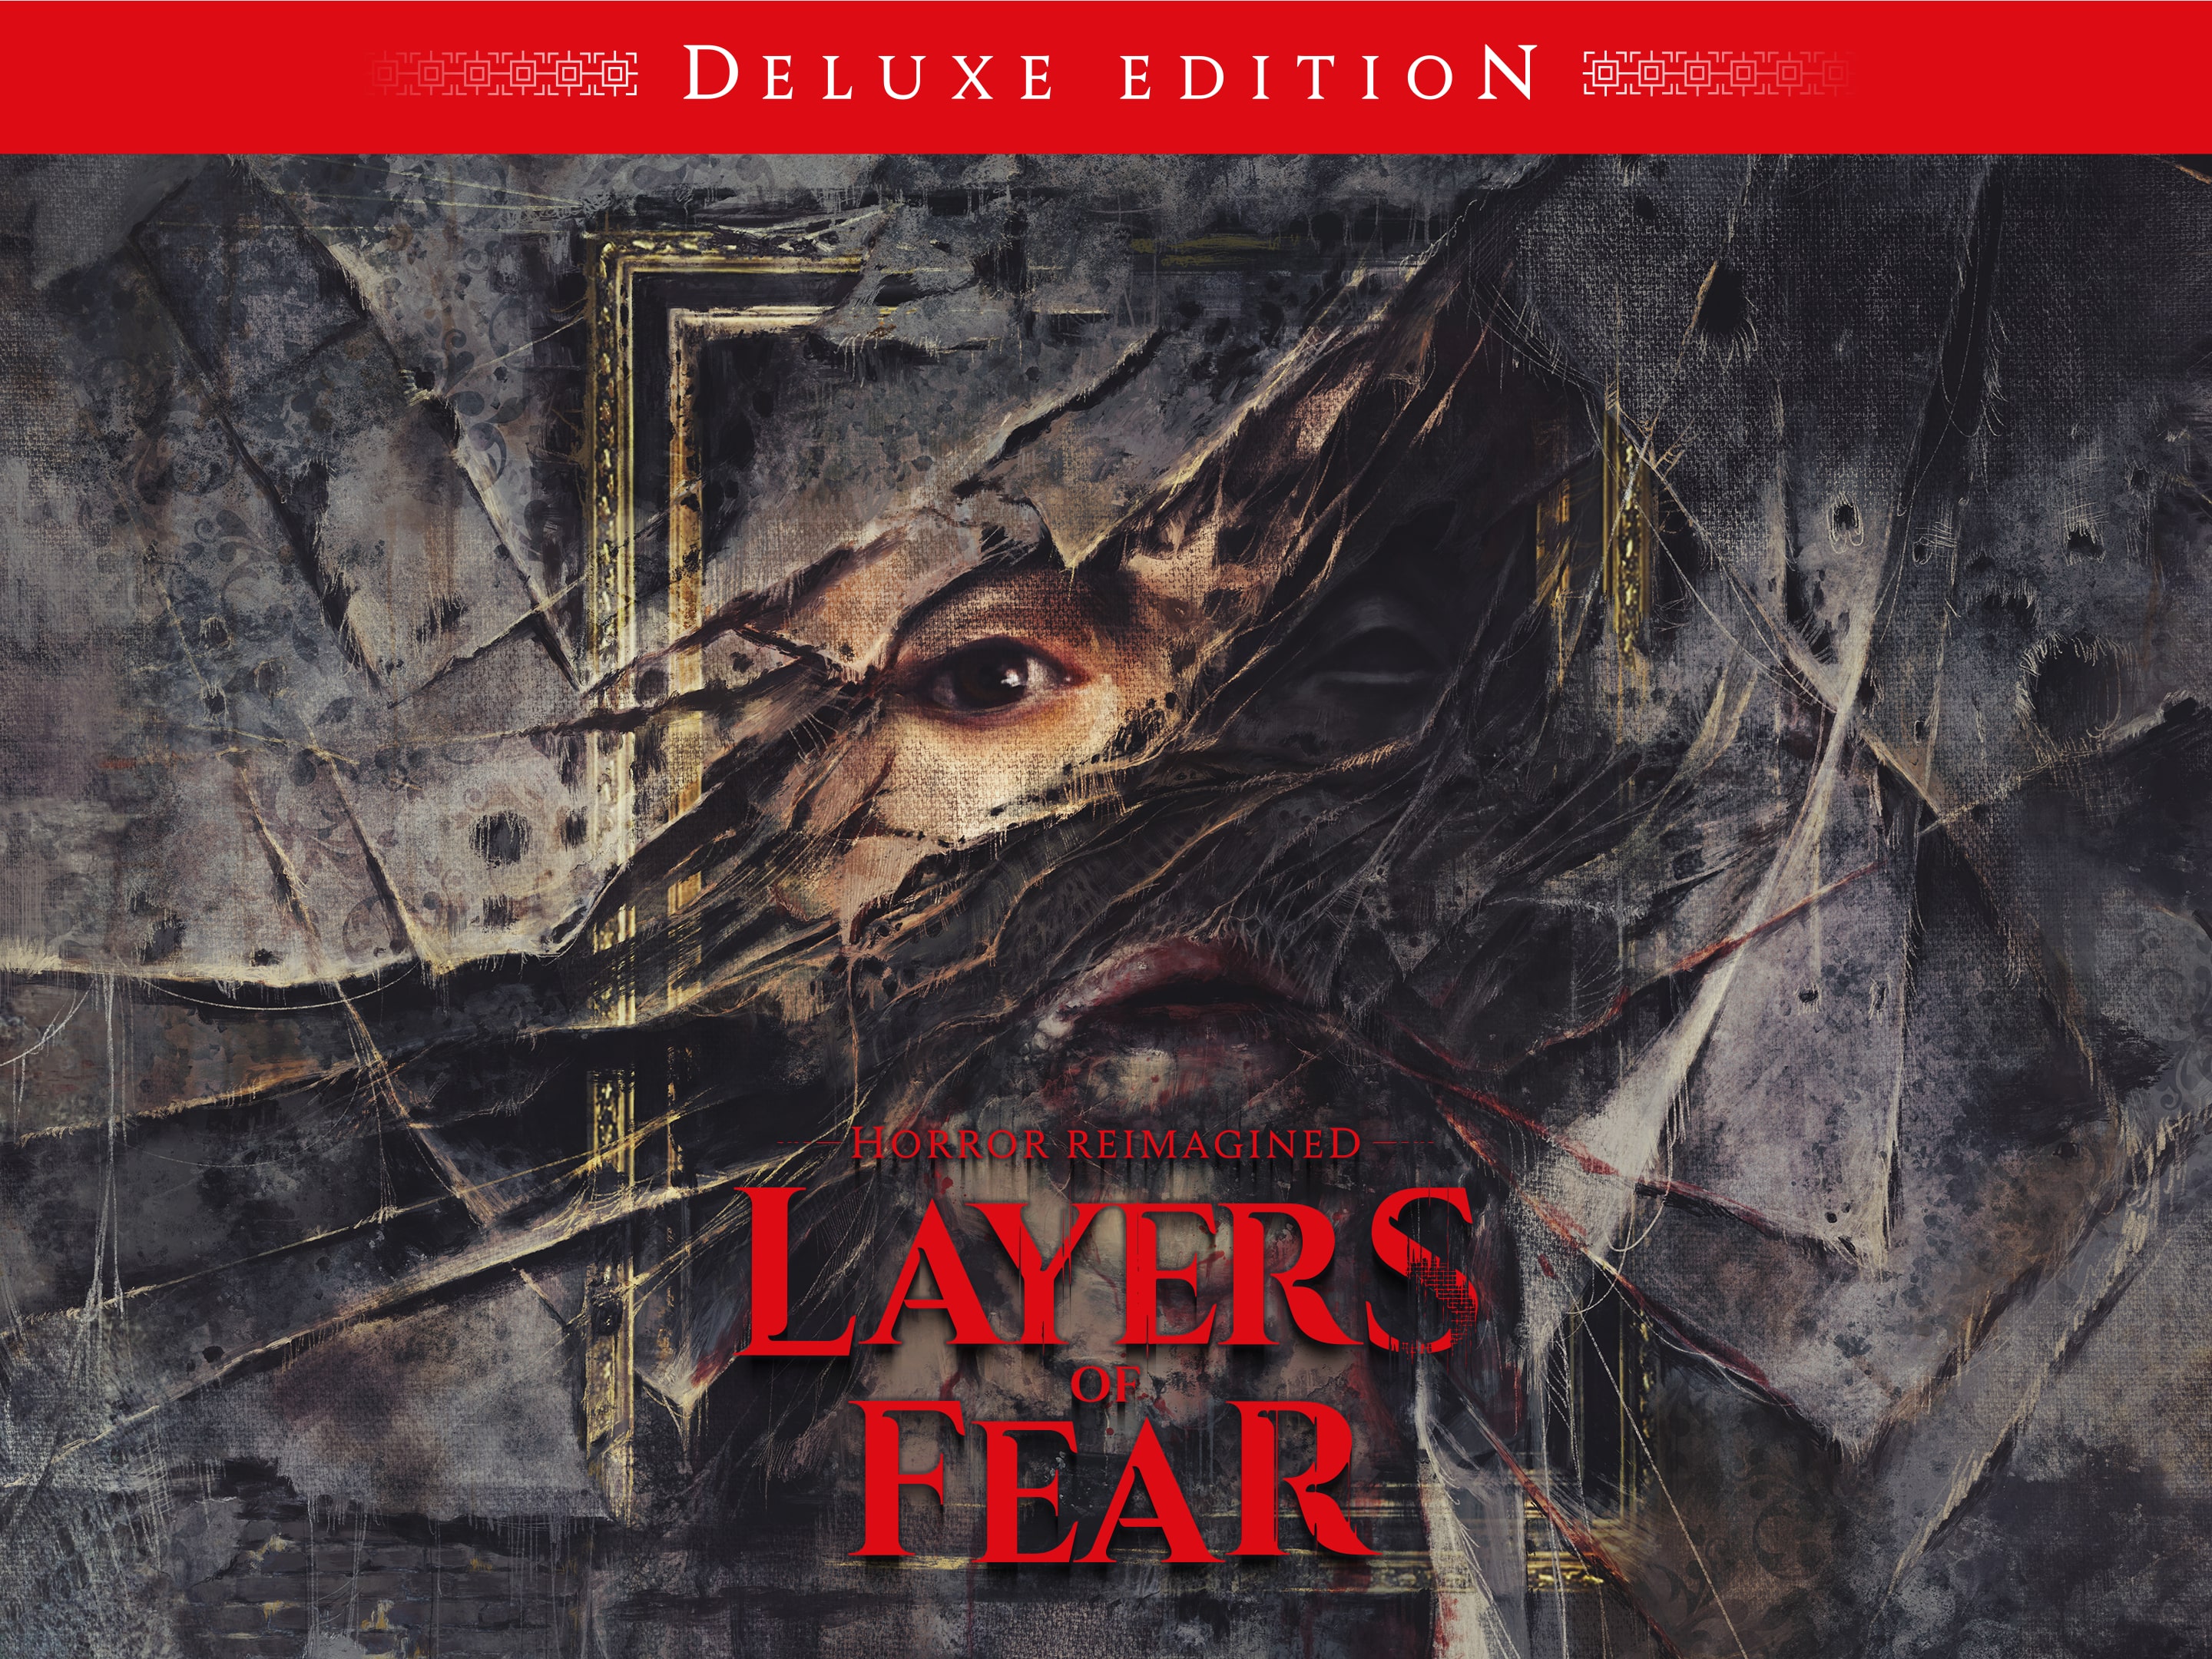 Trilha sonora de Layers of Fear - Epic Games Store